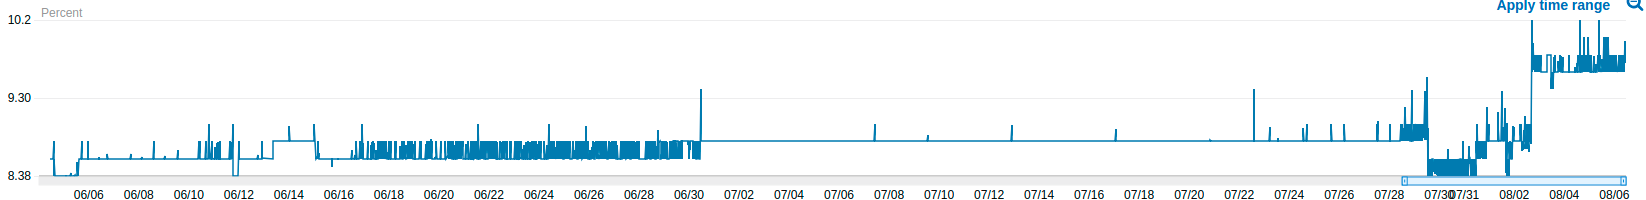 Graph of memory usage on the T2.nano instance.